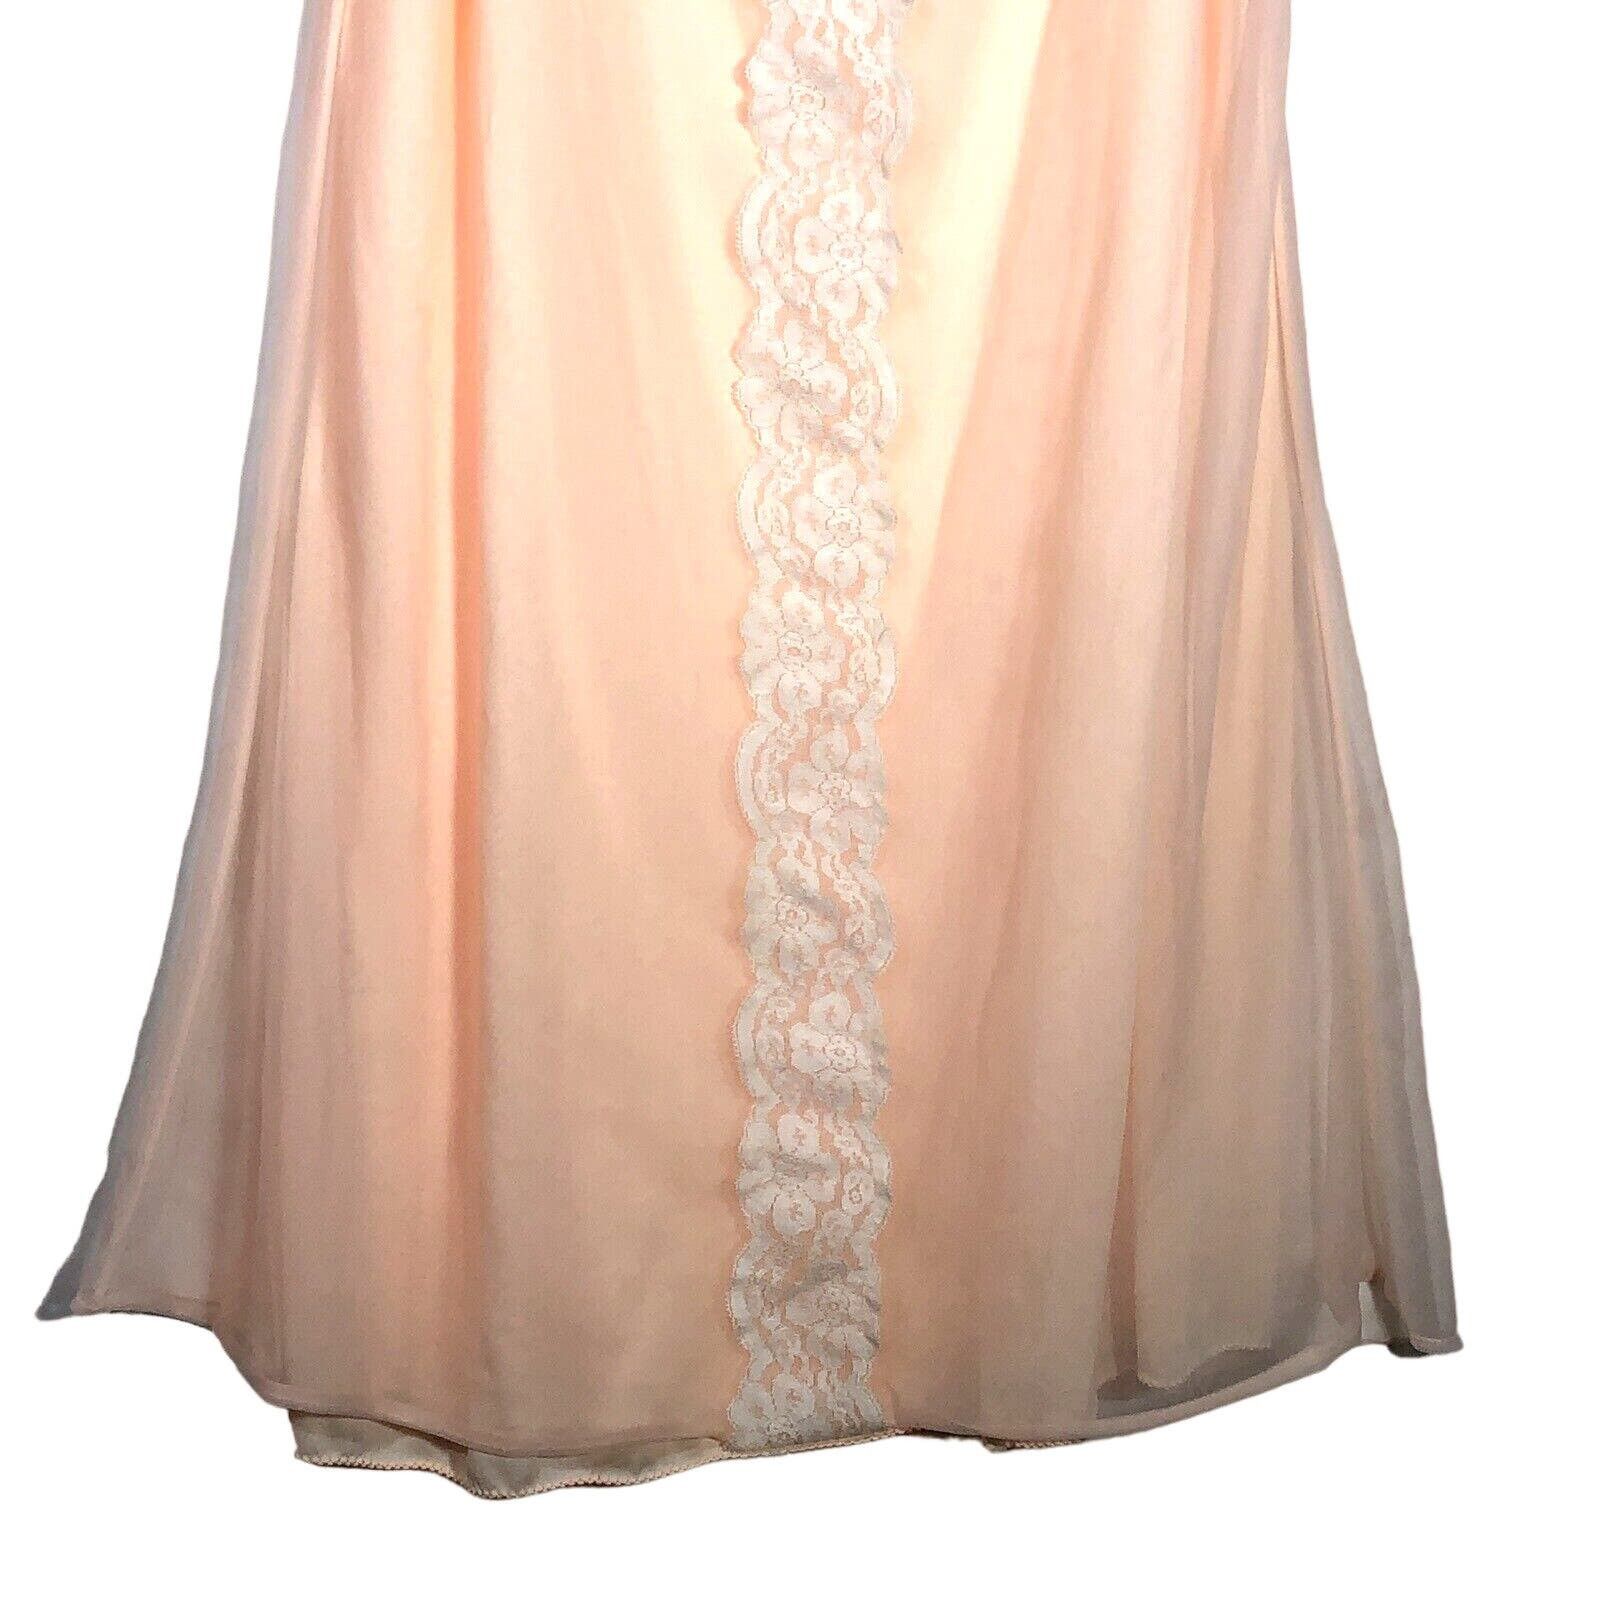 Vintage Vintage Peach and Pink Lace and Chiffon NightGown Dress S Size S / US 4 / IT 40 - 3 Thumbnail